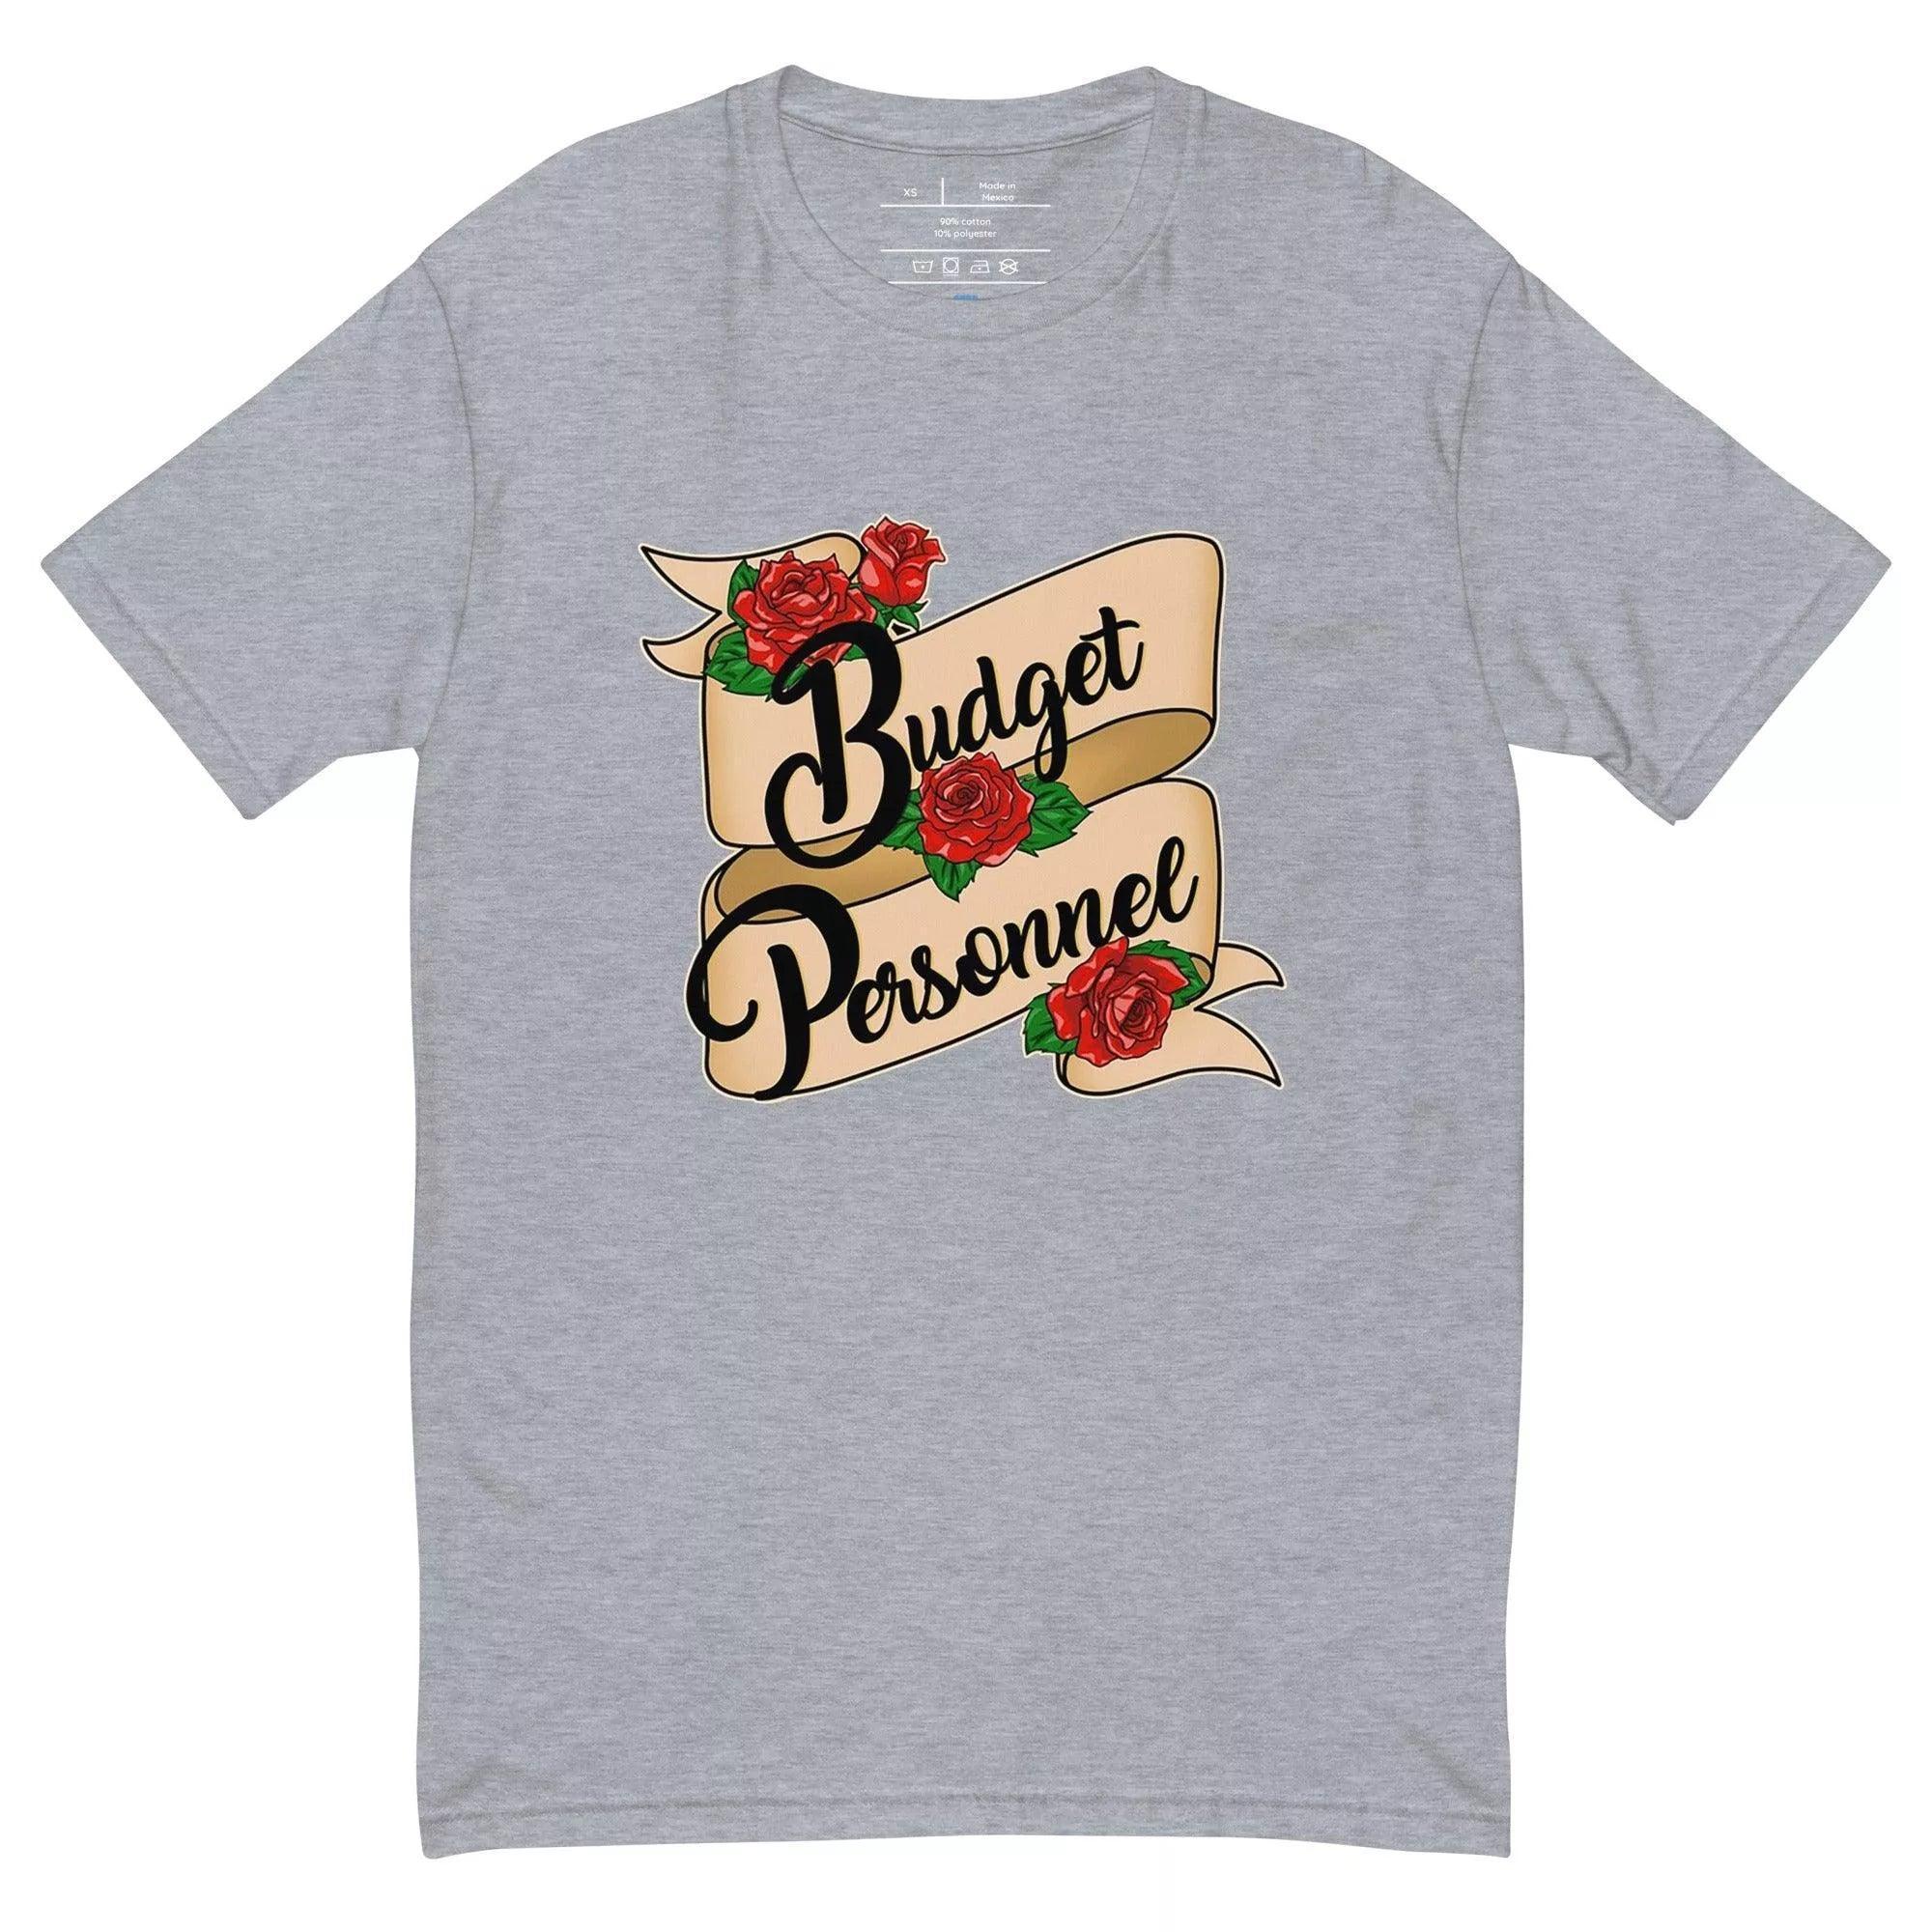 Budget Personnel T-Shirt - InvestmenTees